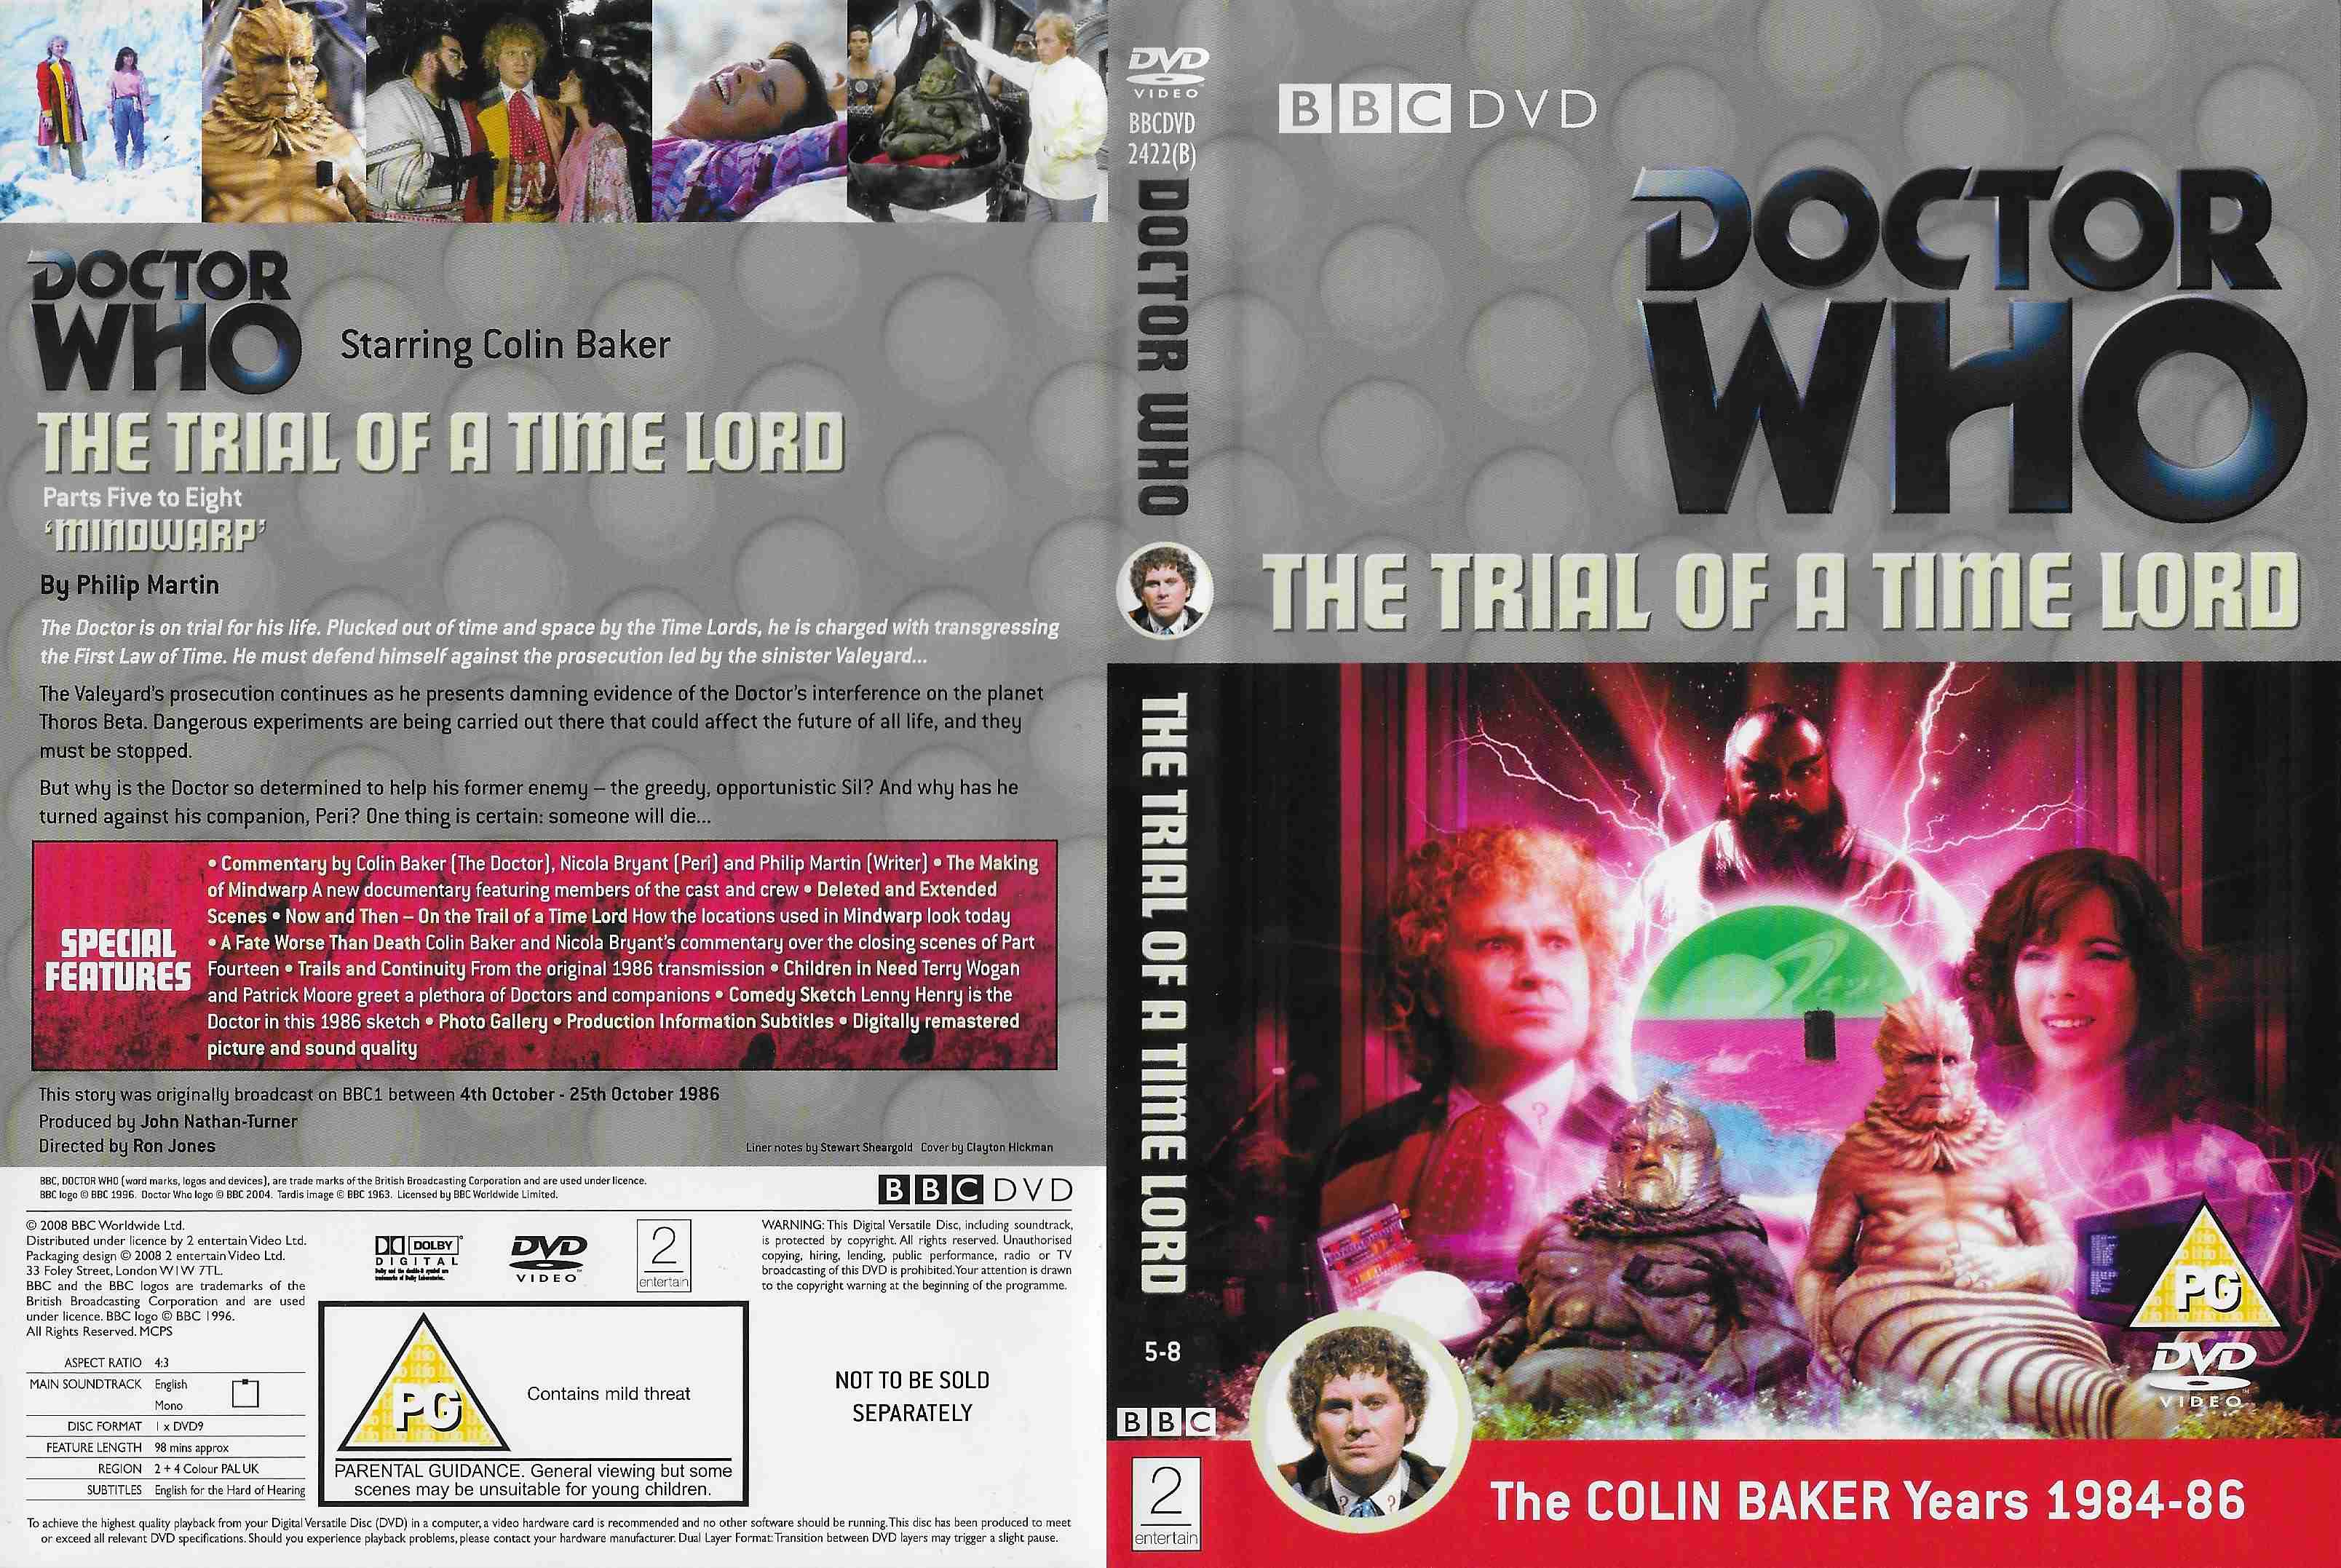 Picture of BBCDVD 2422B Doctor Who - The trial of a Time Lord - Parts 5-8 - Mindwarp by artist Philip Martin from the BBC records and Tapes library